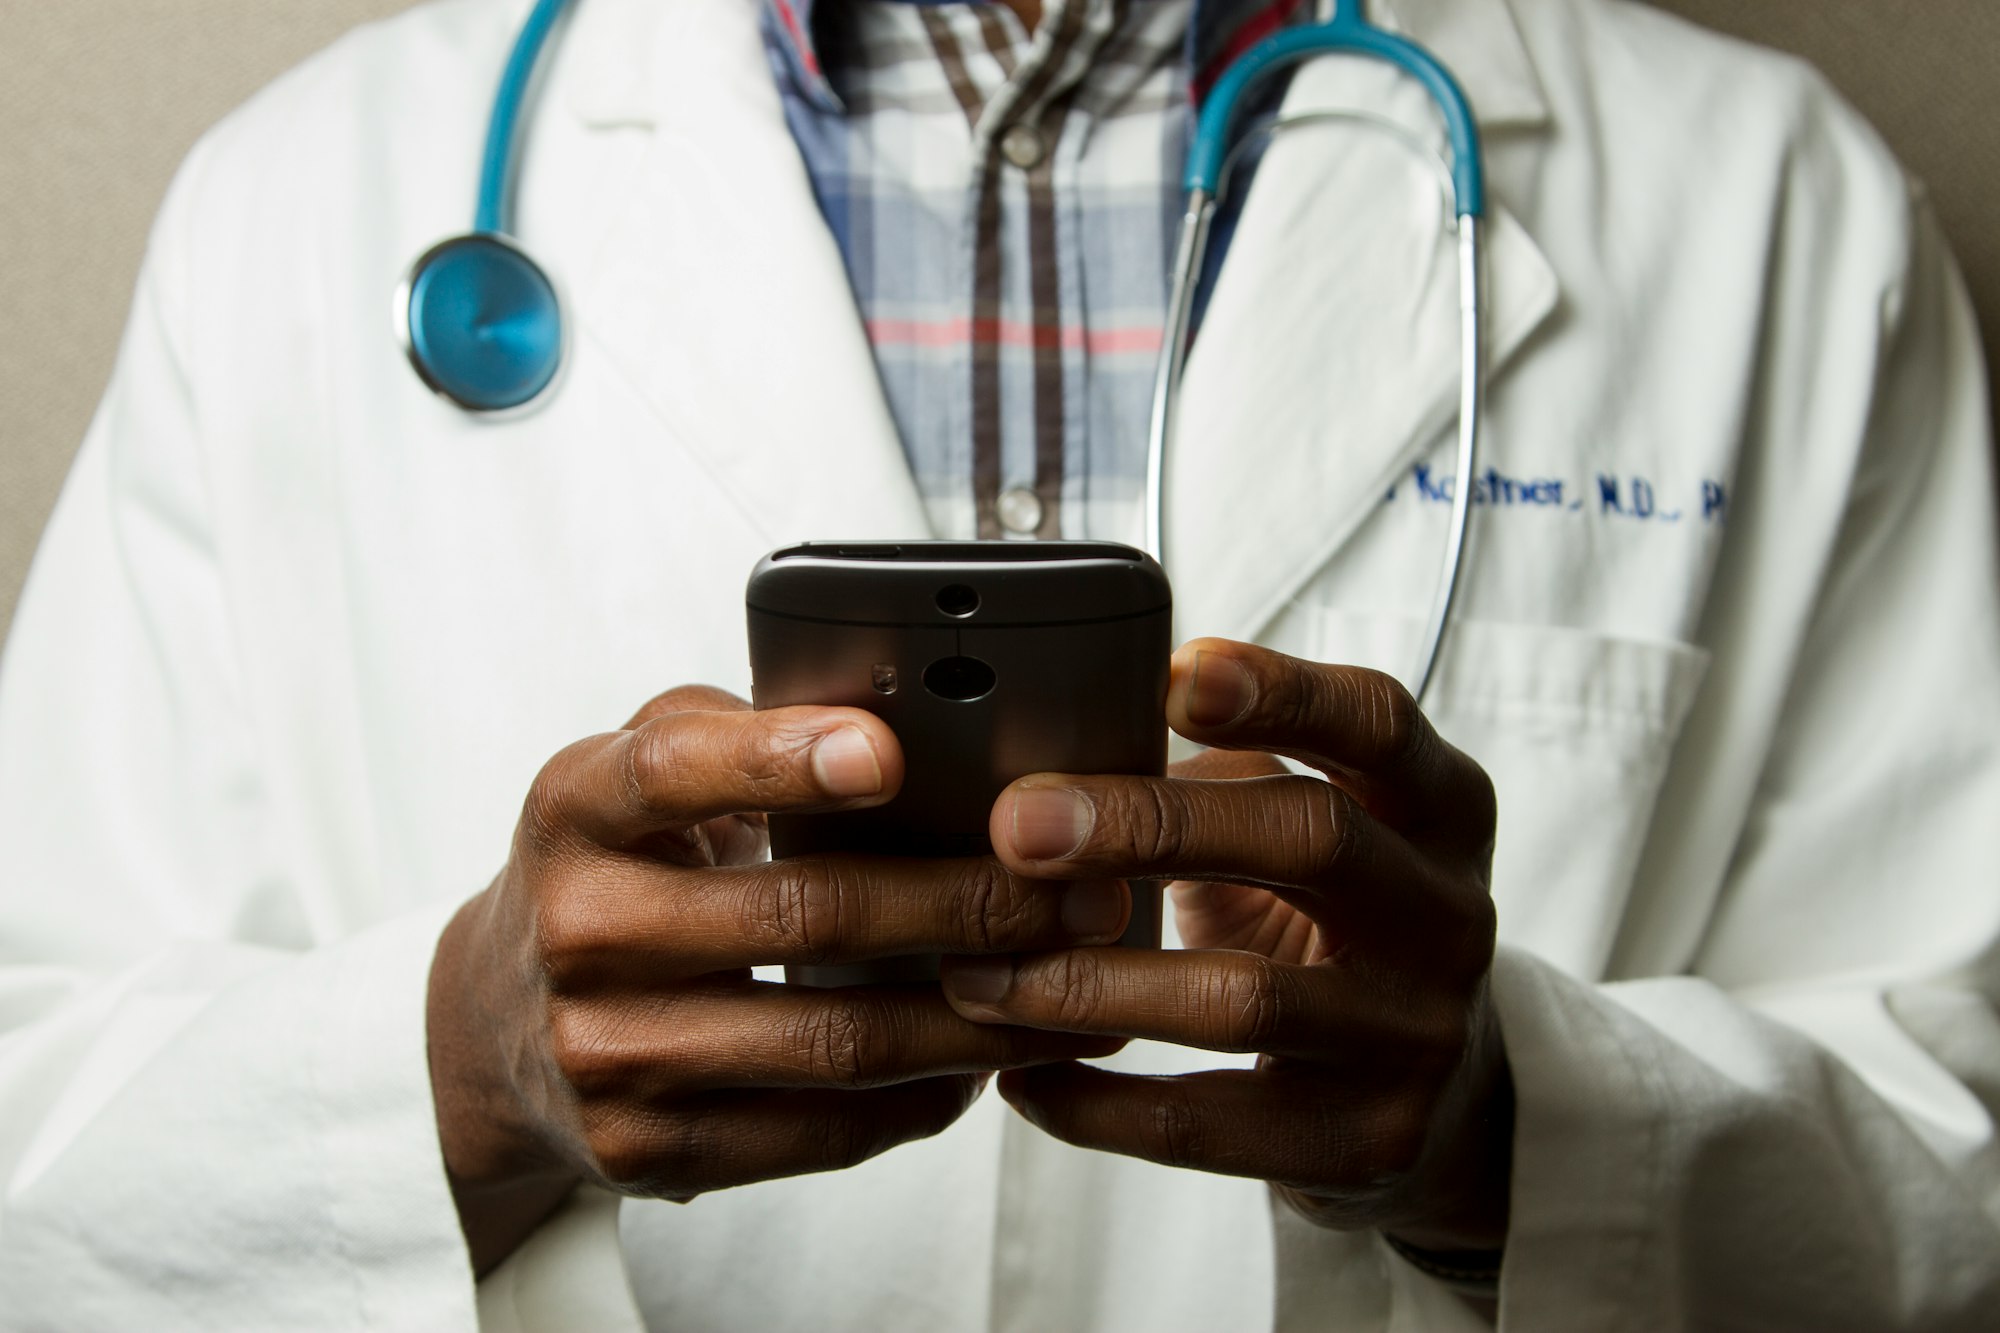 Mobile app development for hospitals - Doctor Holding Cell Phone. Cell phones and other kinds of mobile devices and communications technologies are of increasing importance in the delivery of health care. Photographer Daniel Sone  